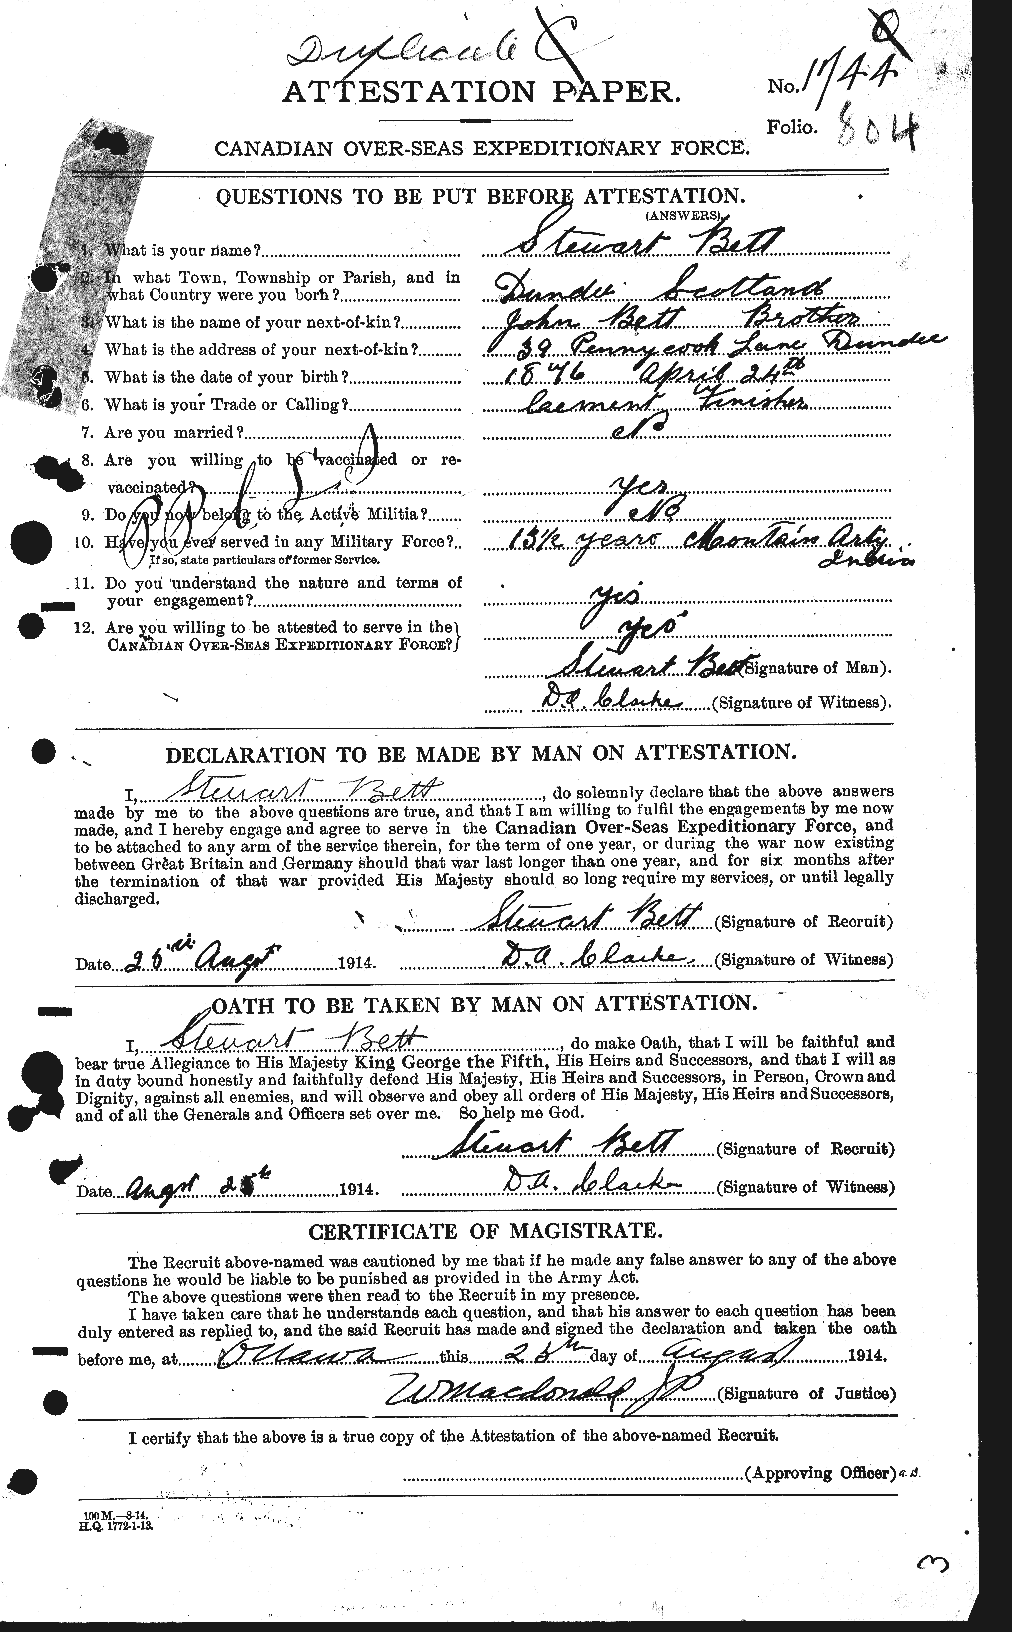 Personnel Records of the First World War - CEF 237078a